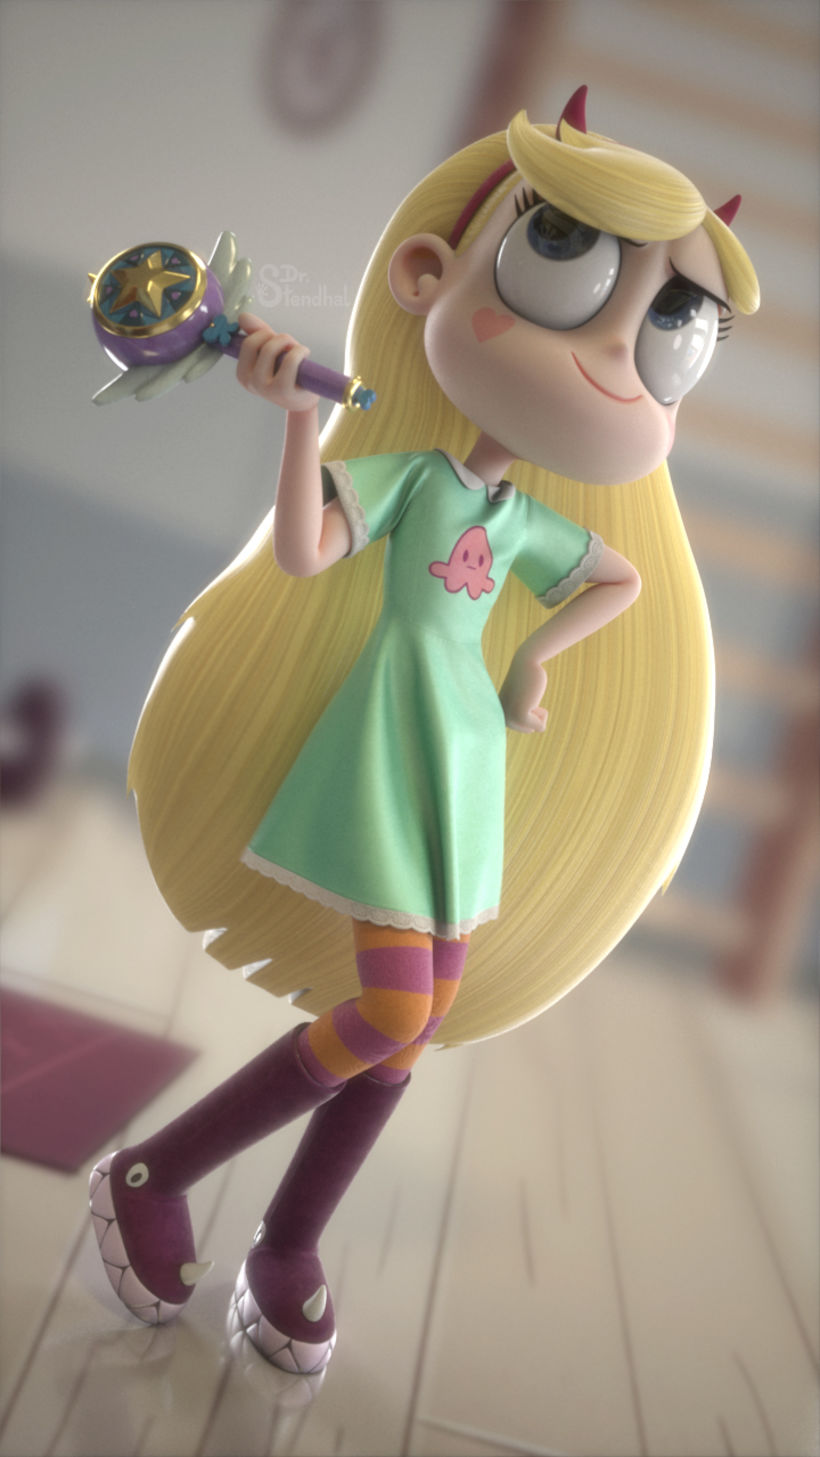 Star Butterfly by Dr. Stendhal 9